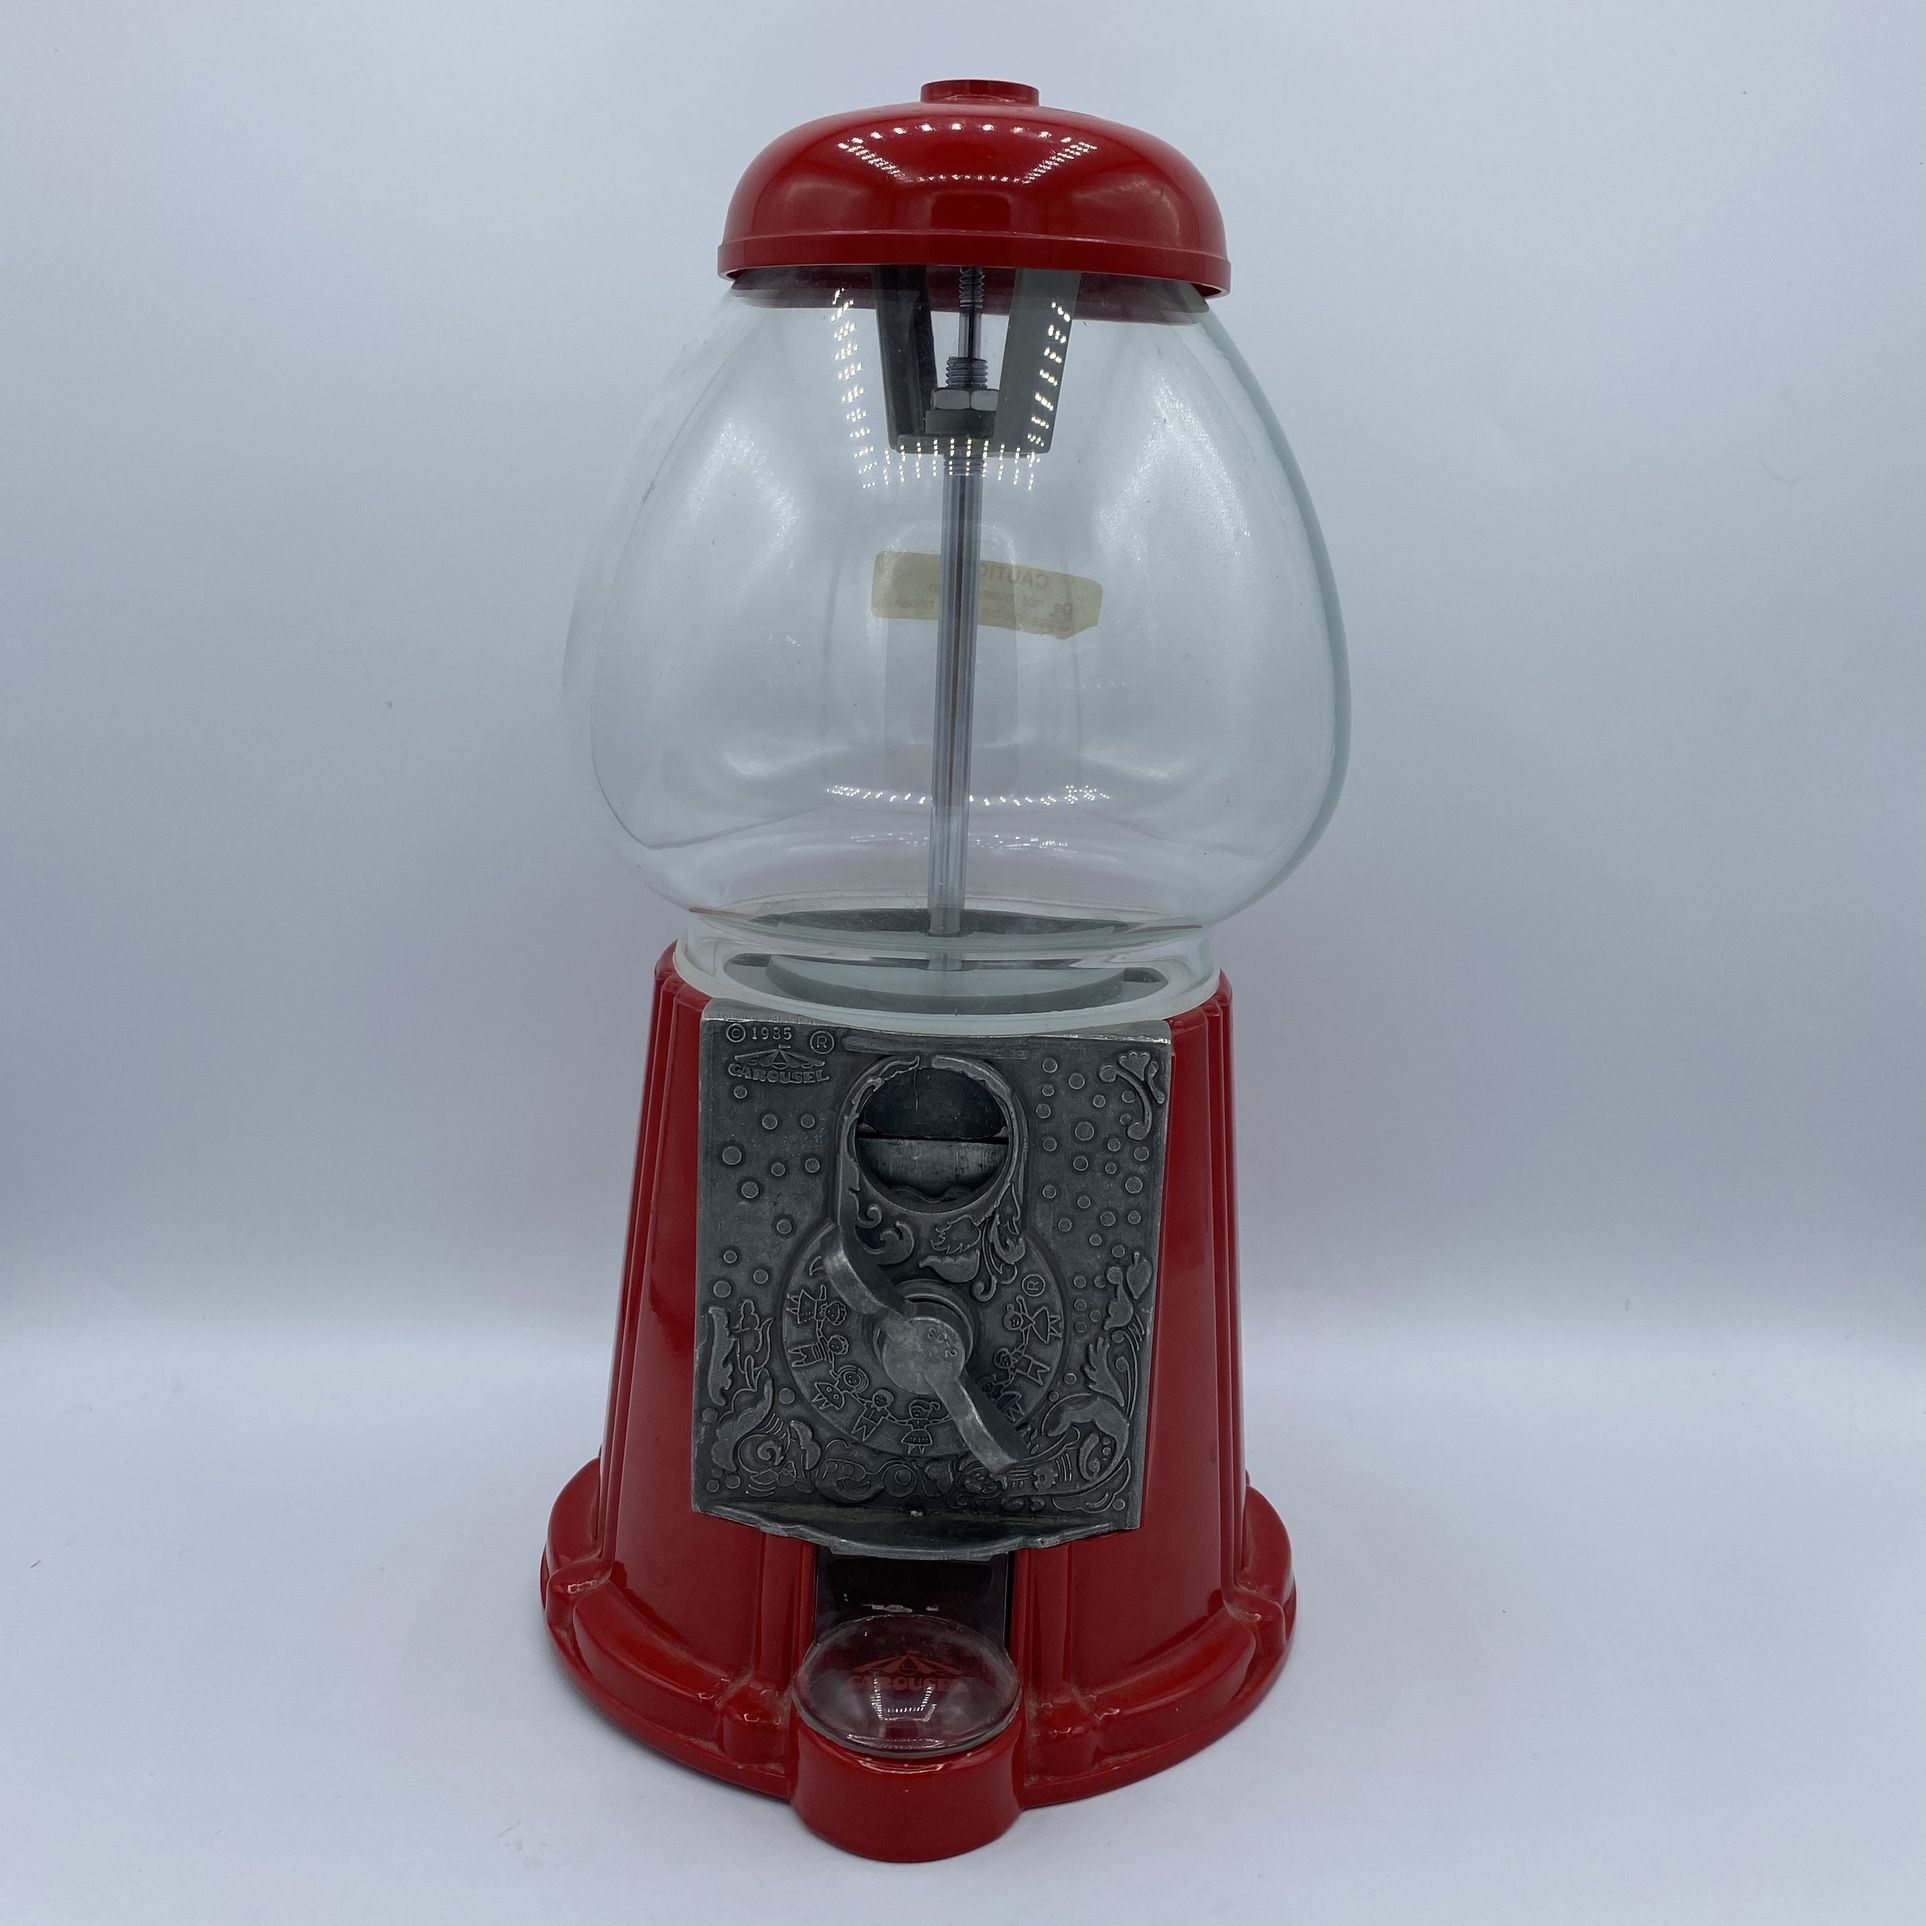 Carousel 1985 Gumball Candy Machine 11" Bank Classic Junior Red Metal Glass #11